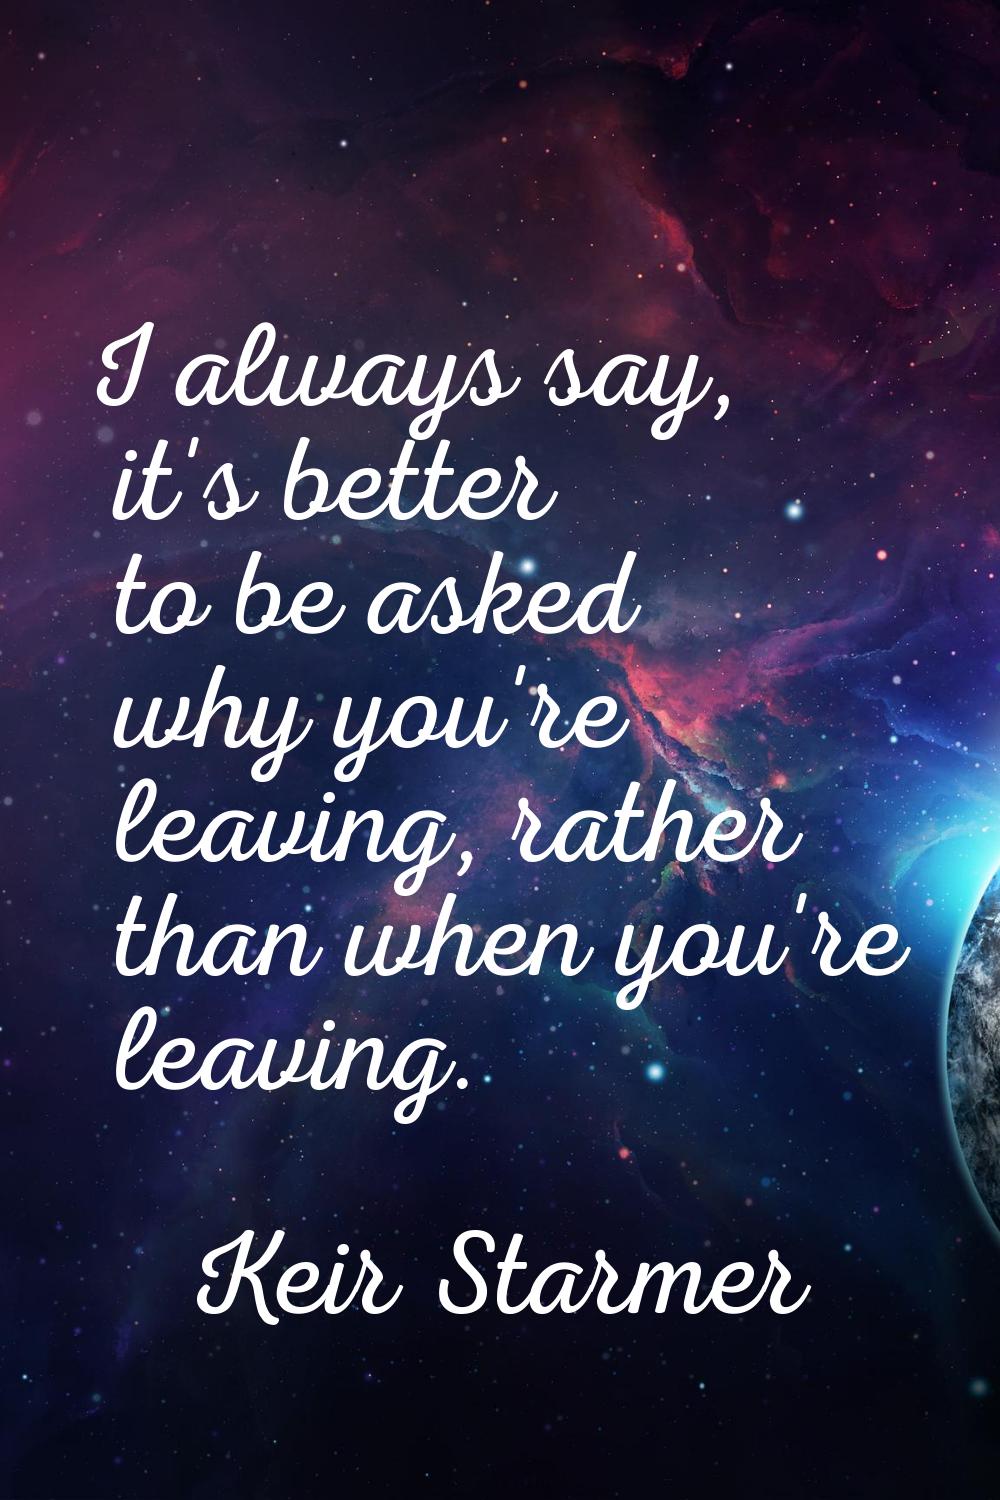 I always say, it's better to be asked why you're leaving, rather than when you're leaving.